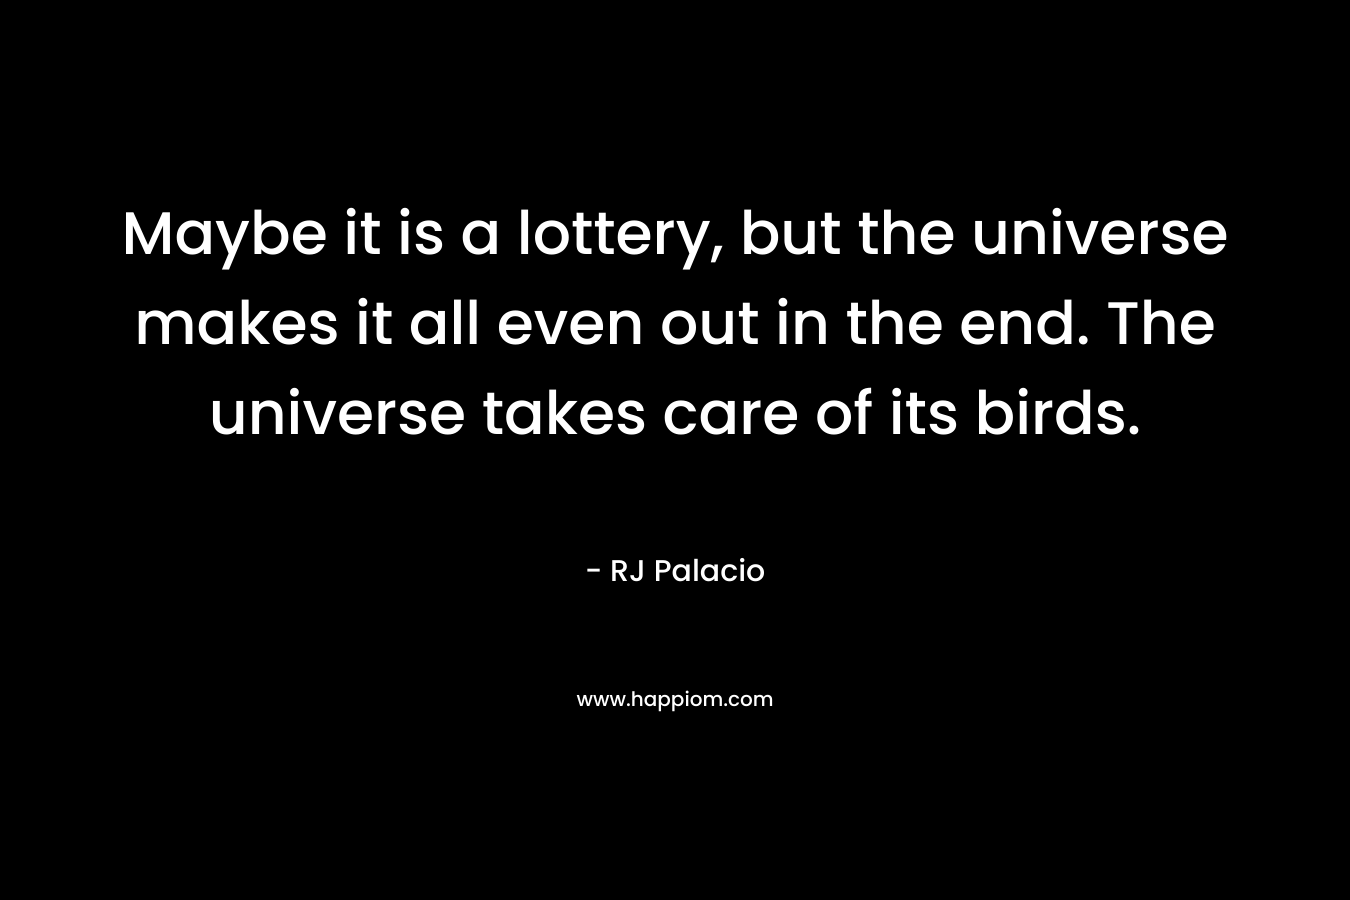 Maybe it is a lottery, but the universe makes it all even out in the end. The universe takes care of its birds. – RJ Palacio